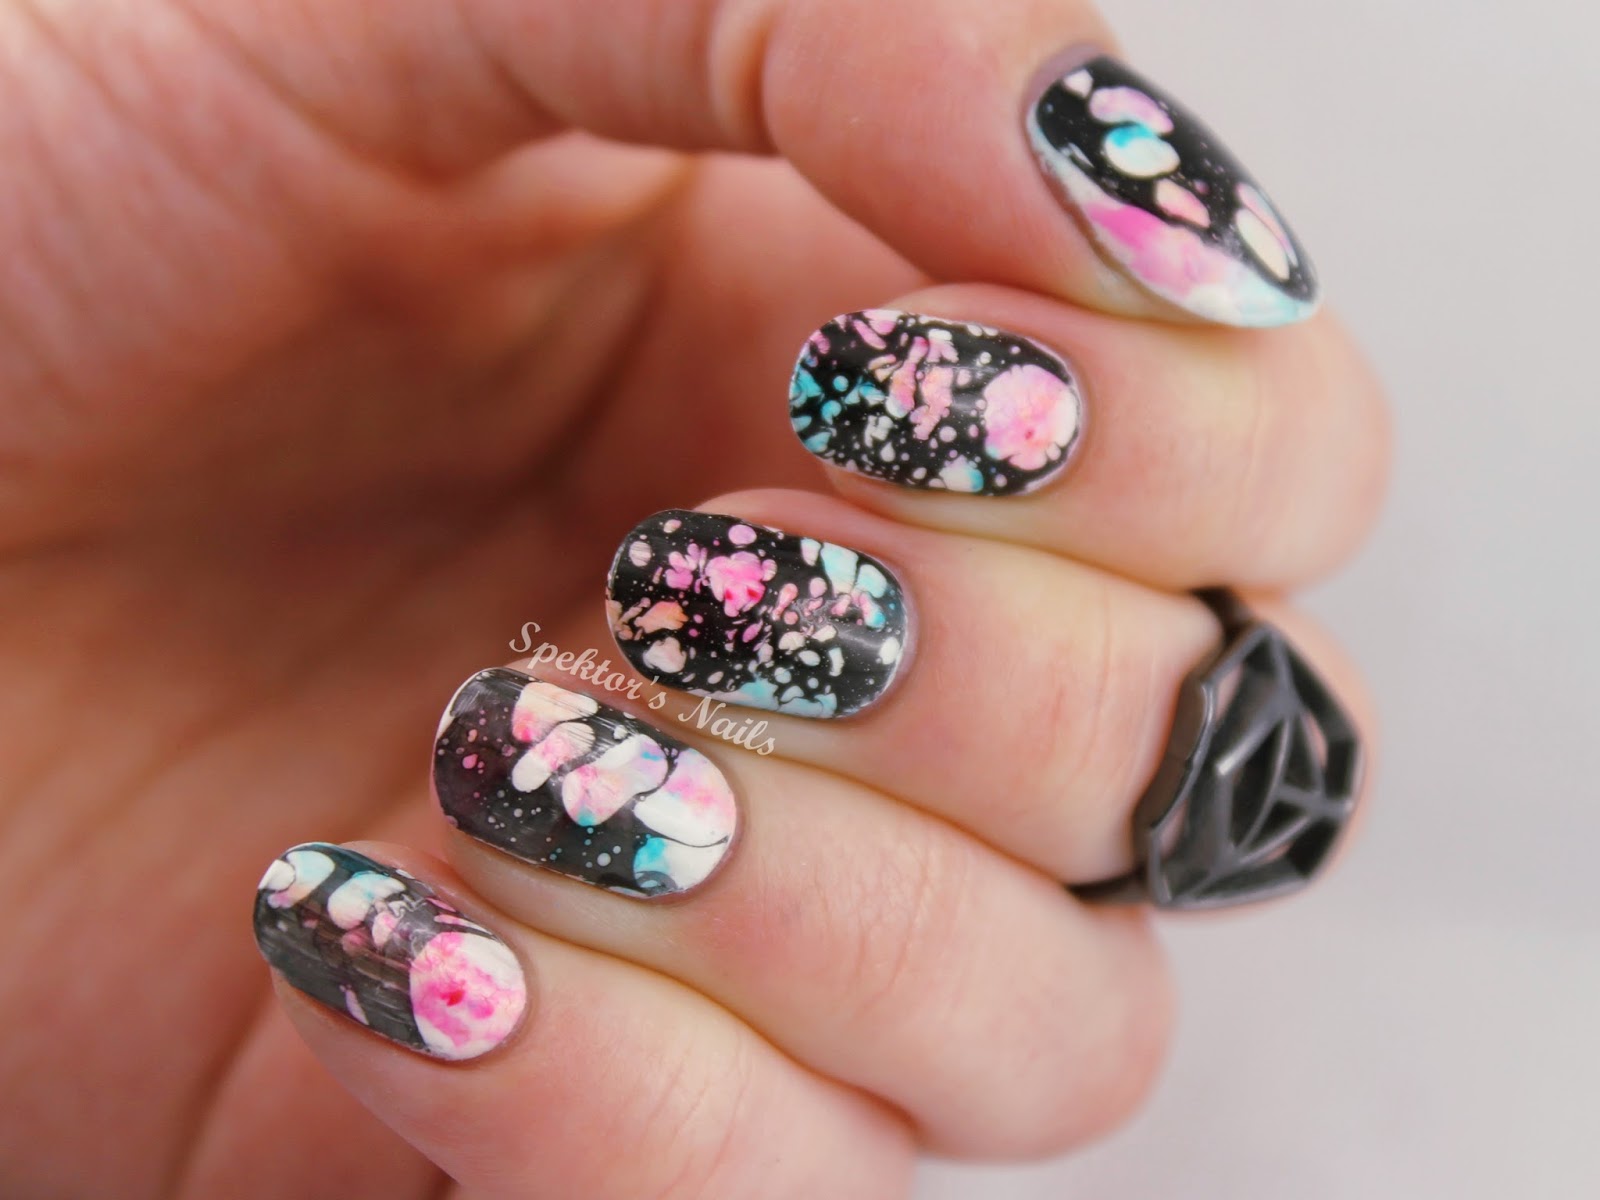 Spektor's Nails: Watercolor Nails inspired by Madeline Poole | Nail art ...